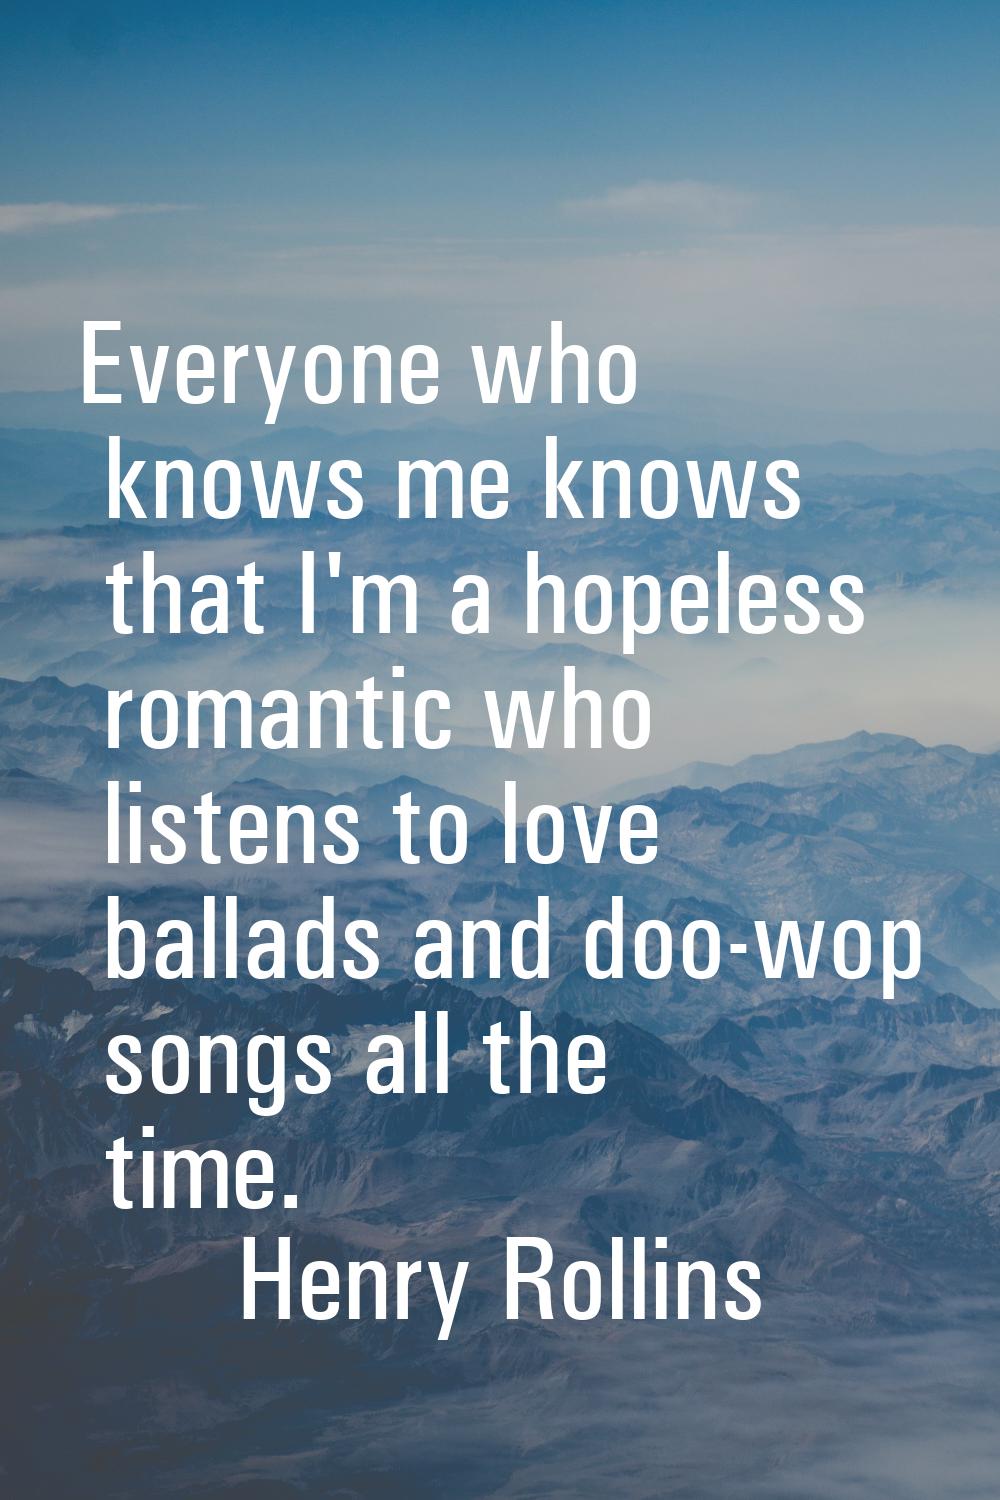 Everyone who knows me knows that I'm a hopeless romantic who listens to love ballads and doo-wop so